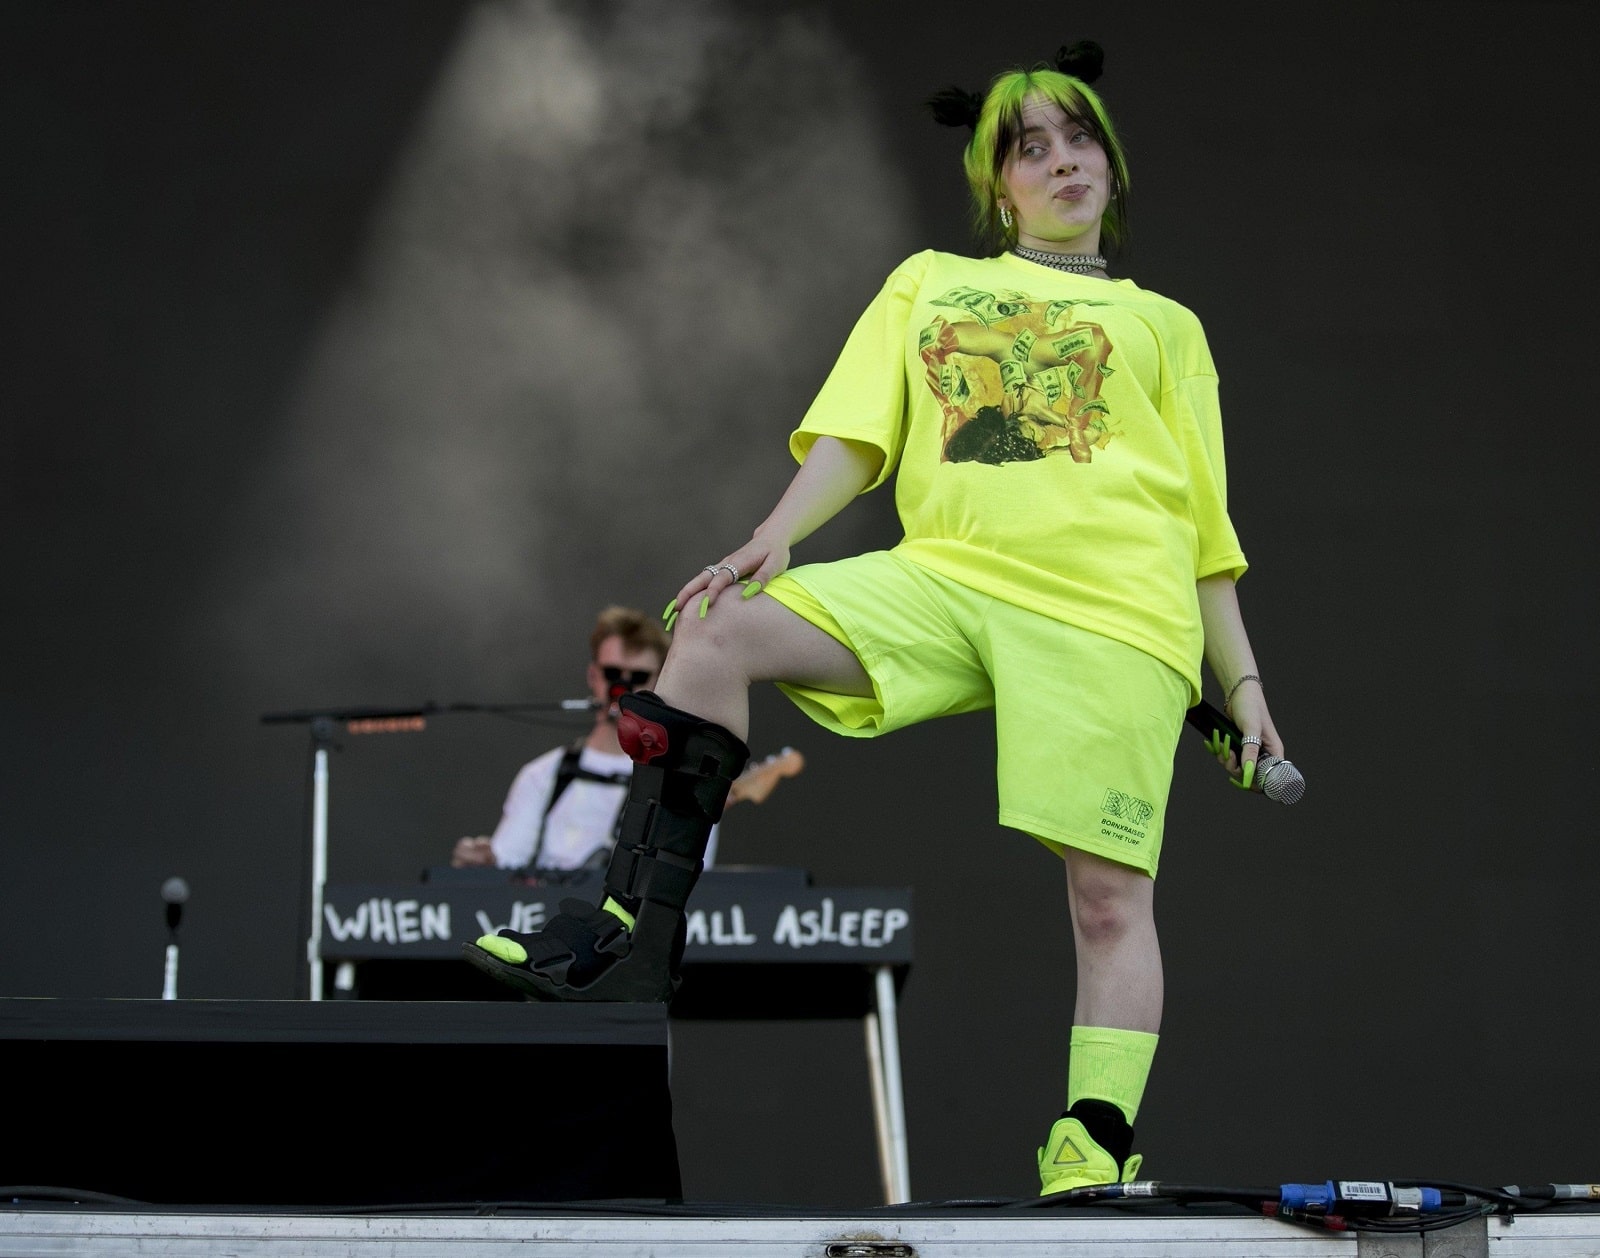 Does Billie Eilish agree with Texas's abortion laws? – Film Daily